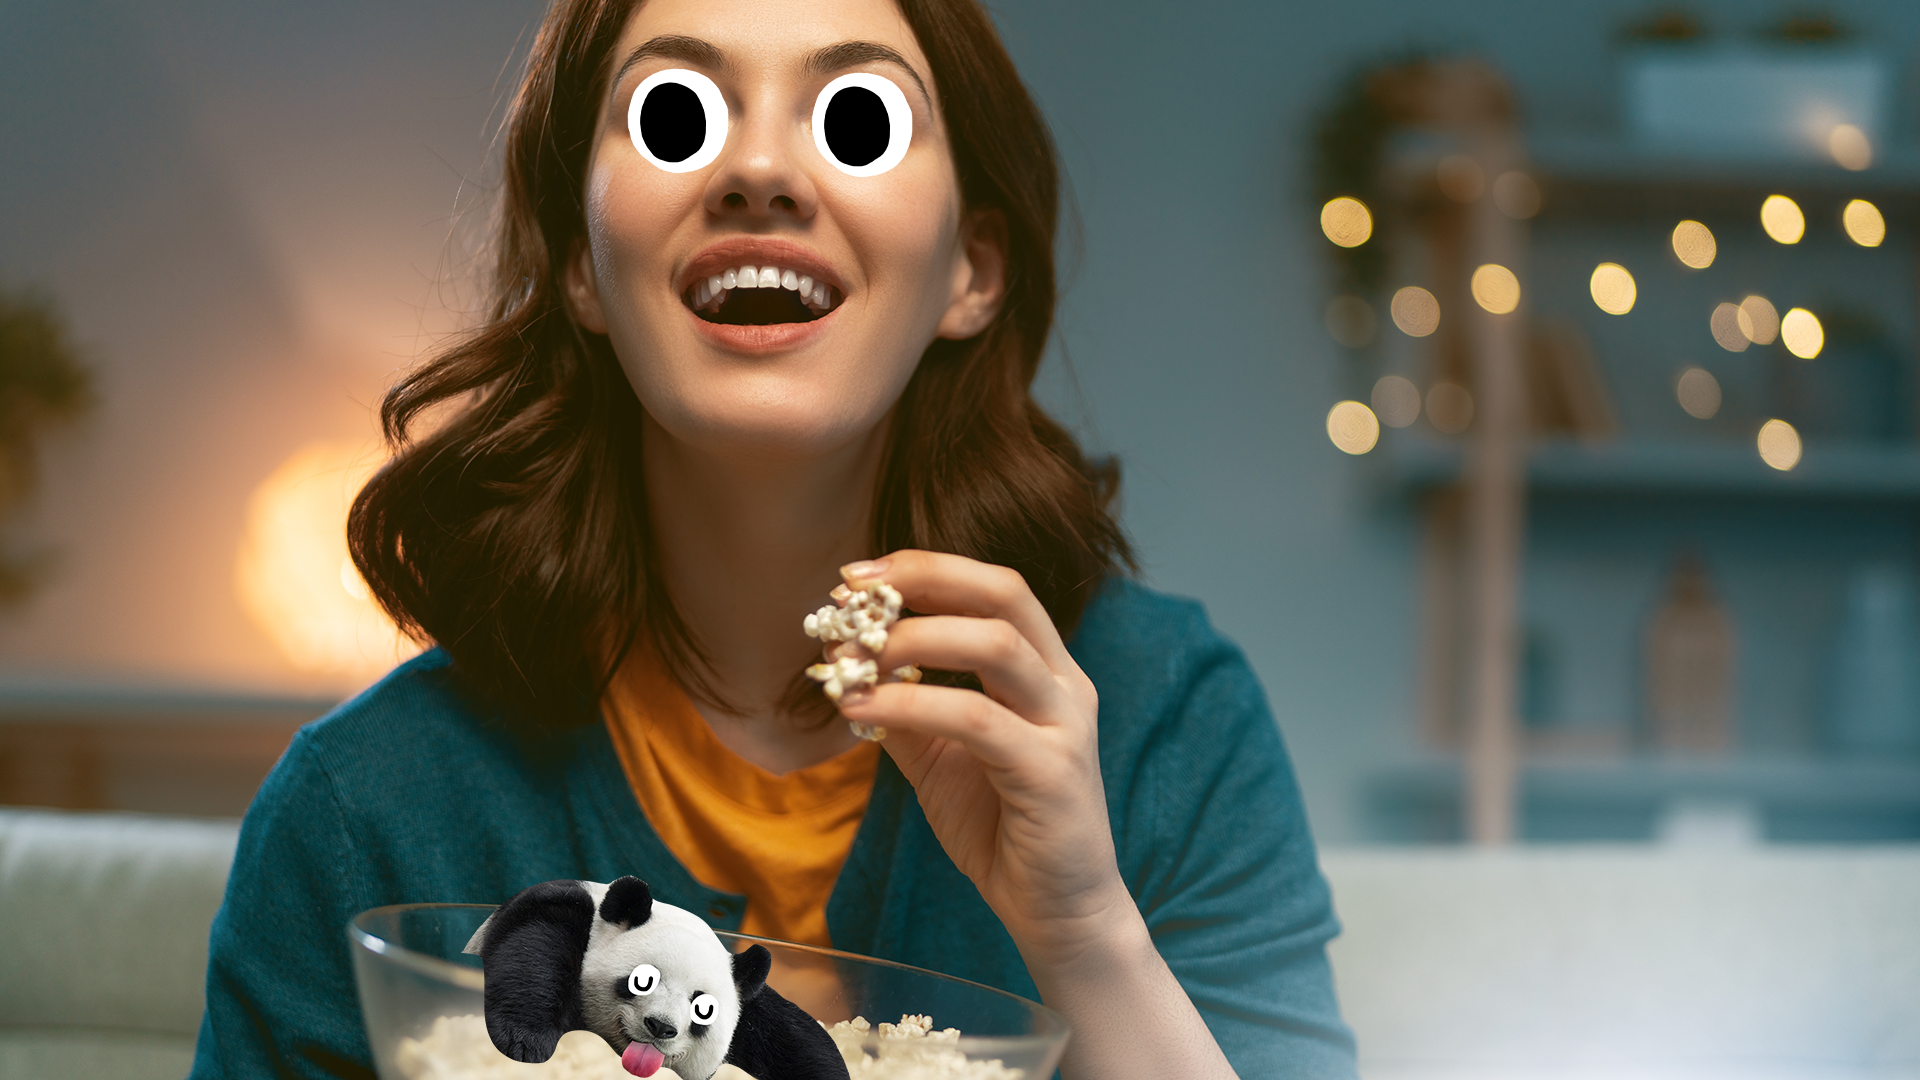 Woman watching film and derpy panda